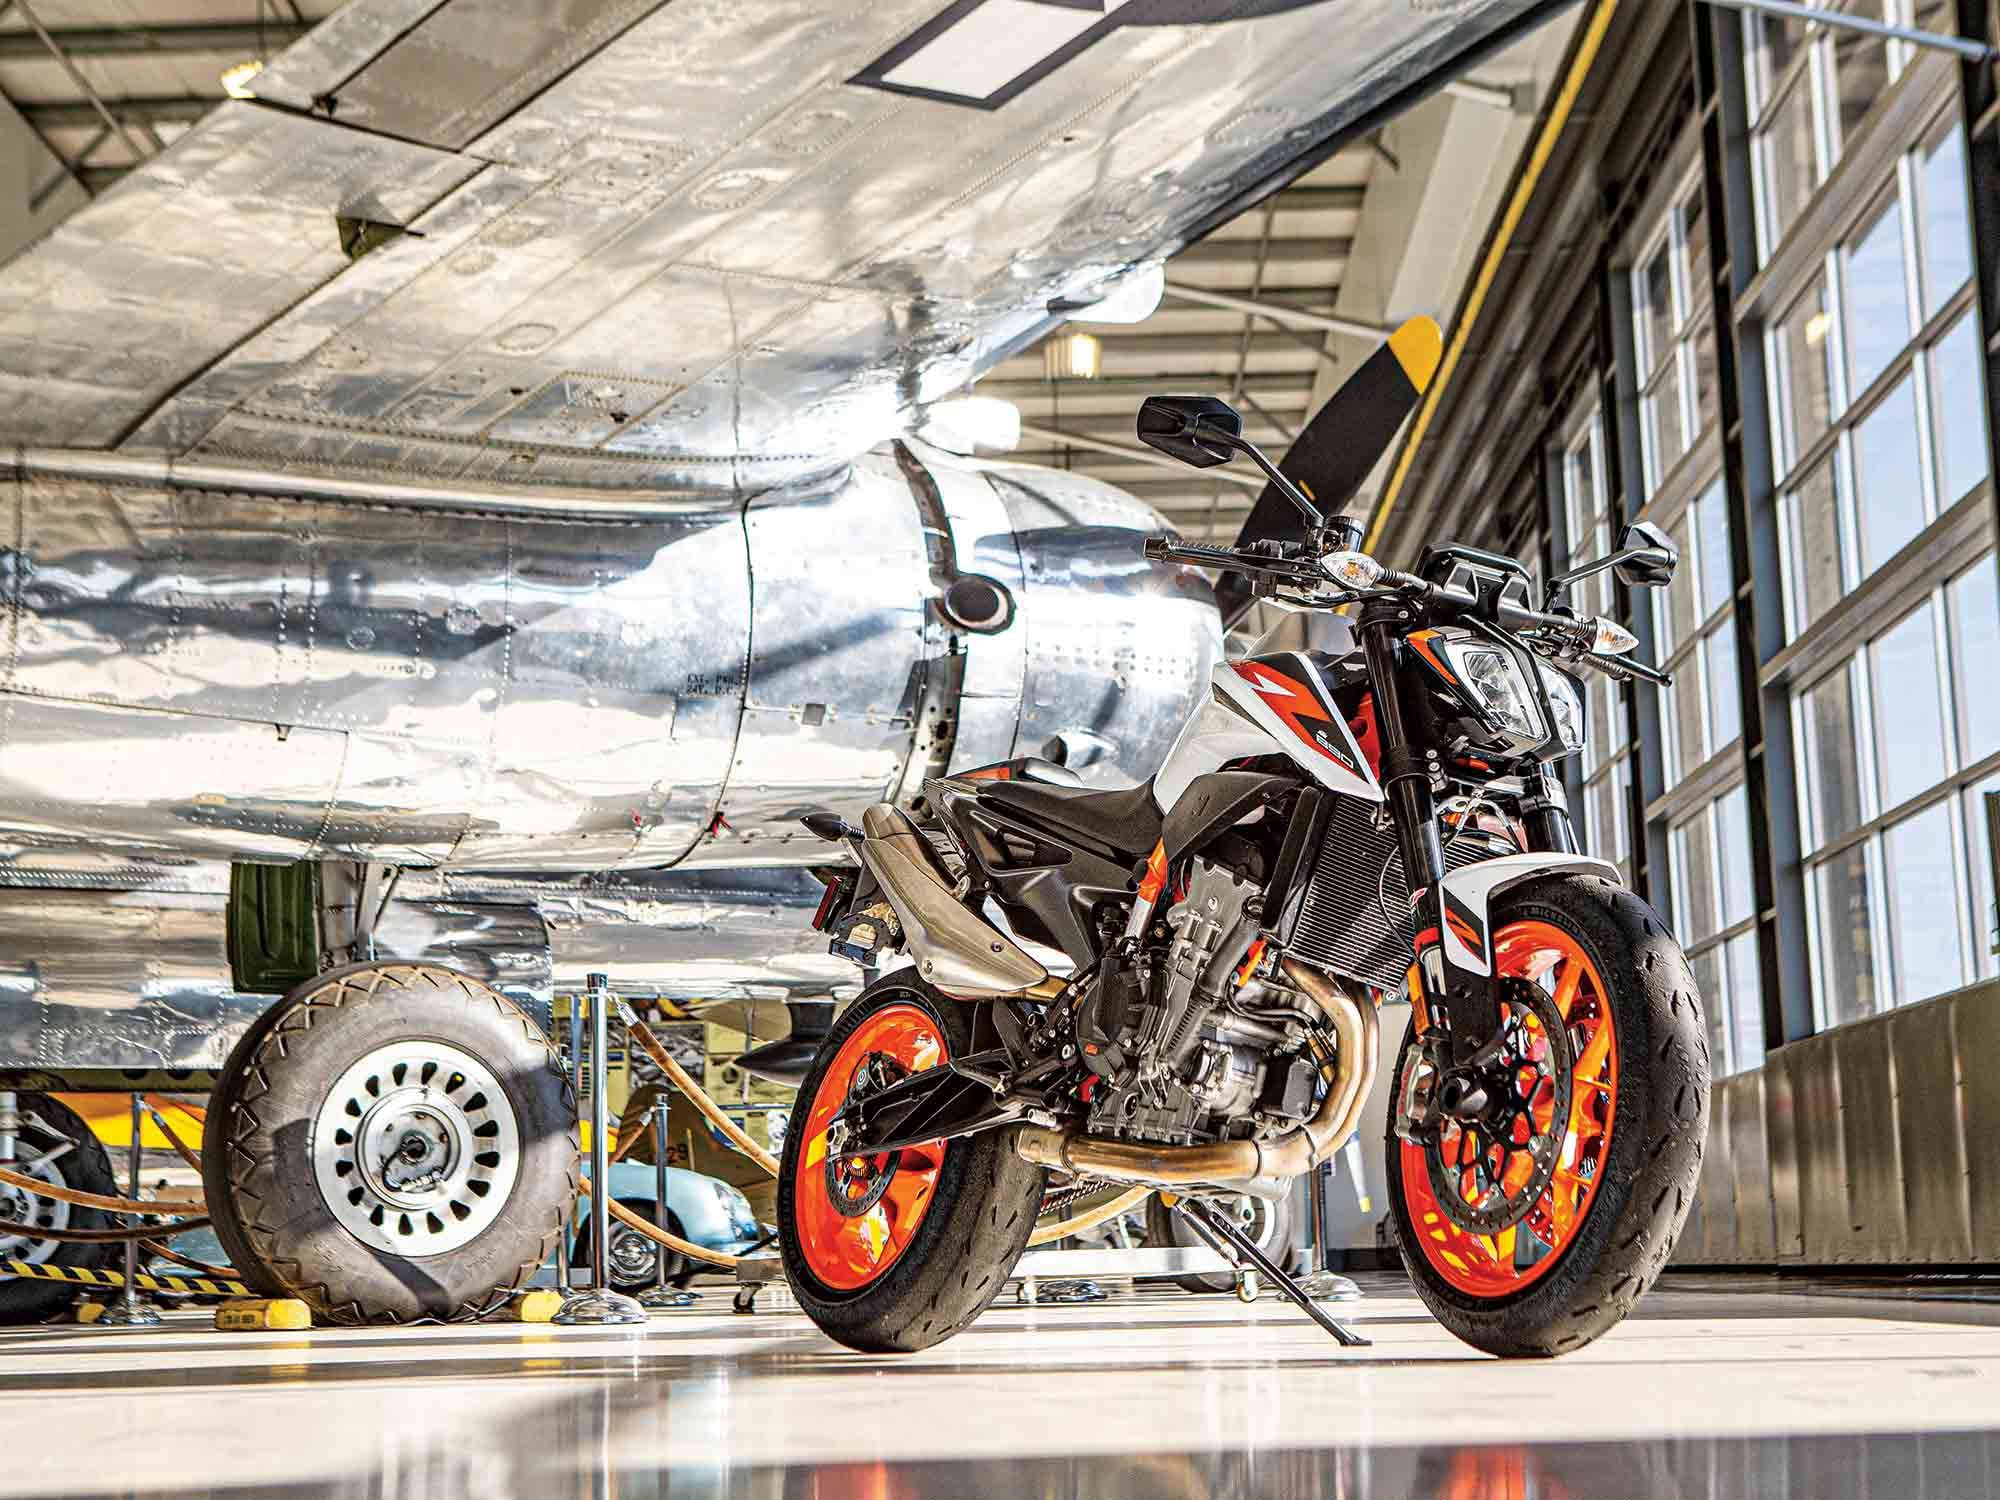 The KTM 890 Duke R is <em>Cycle World</em>’s Best Middleweight Streetbike for 2020.